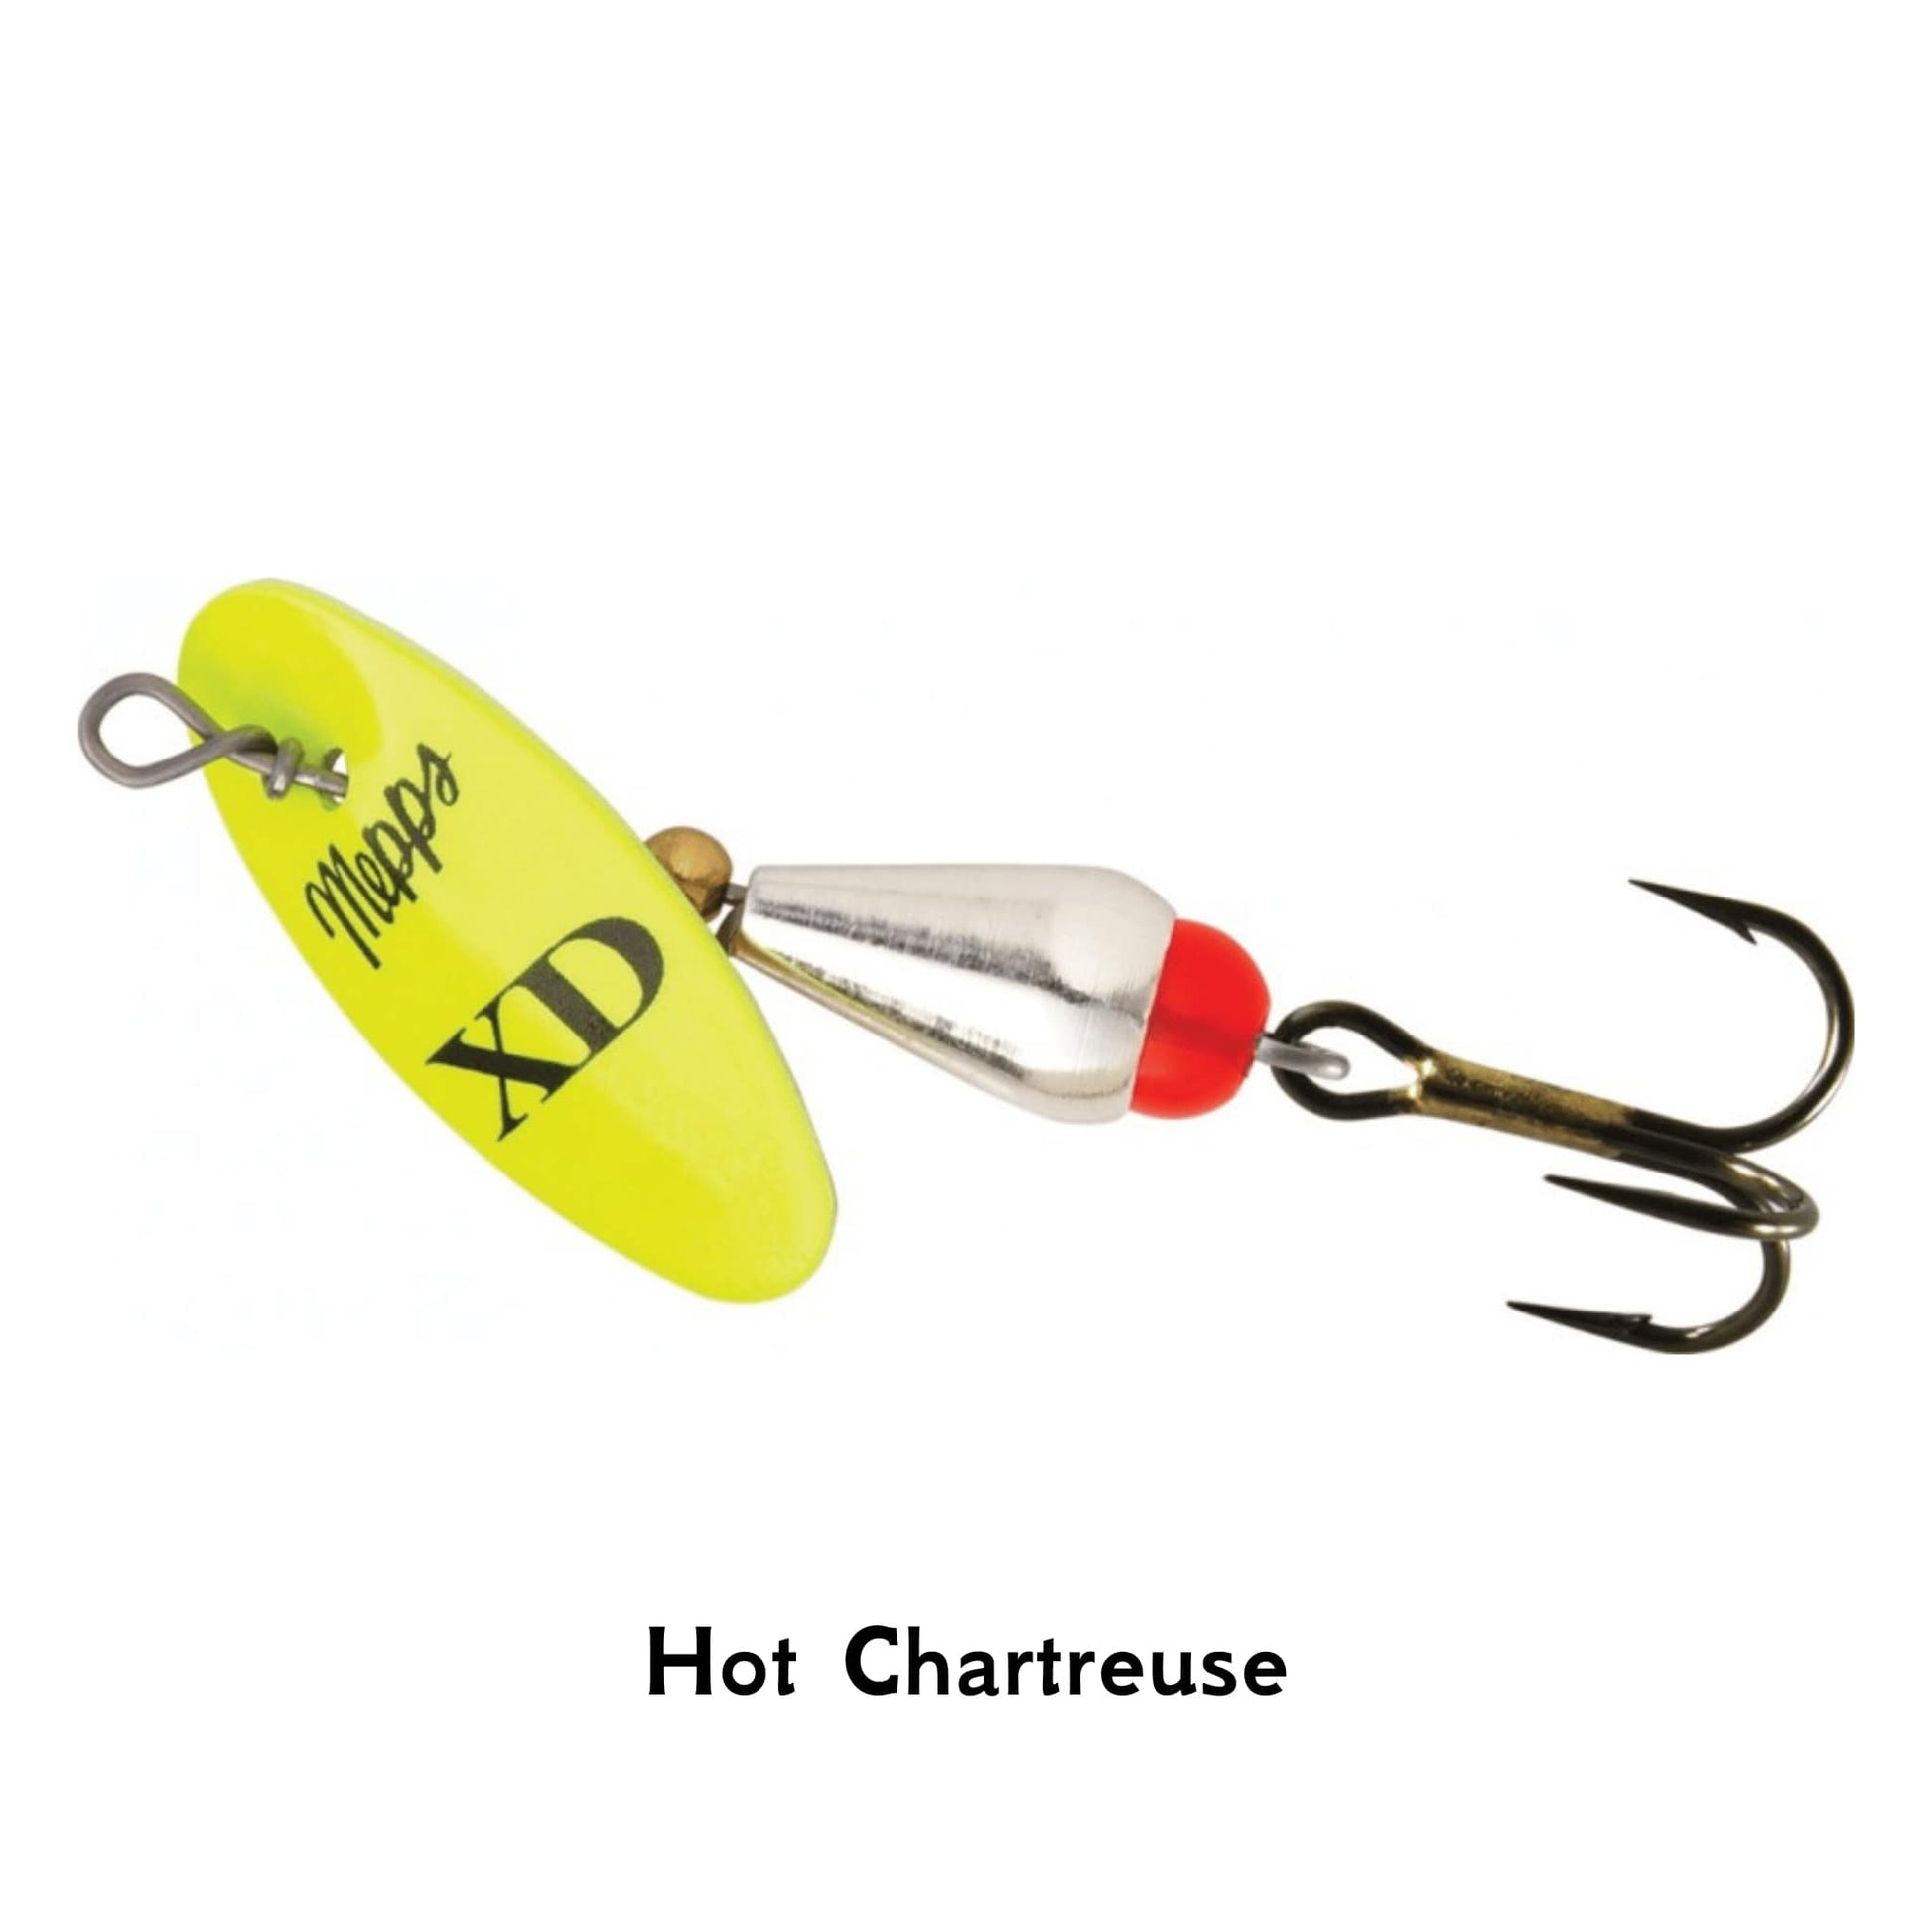 Mepps XD Xtra Deep Hot Chartreuse Spoon Fishing Lure All Colours Size 2 3 Pike Perch Zander Spinner Vertical Jig